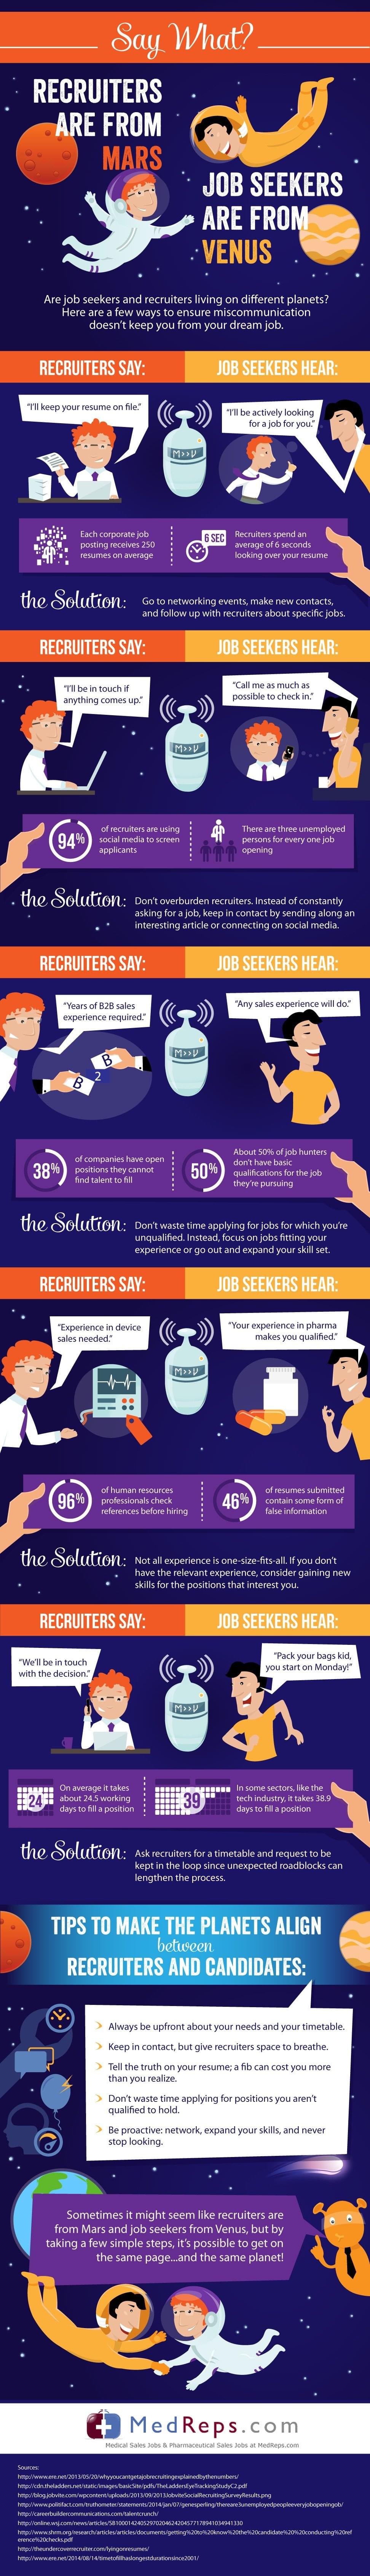 job seekers and recruiters